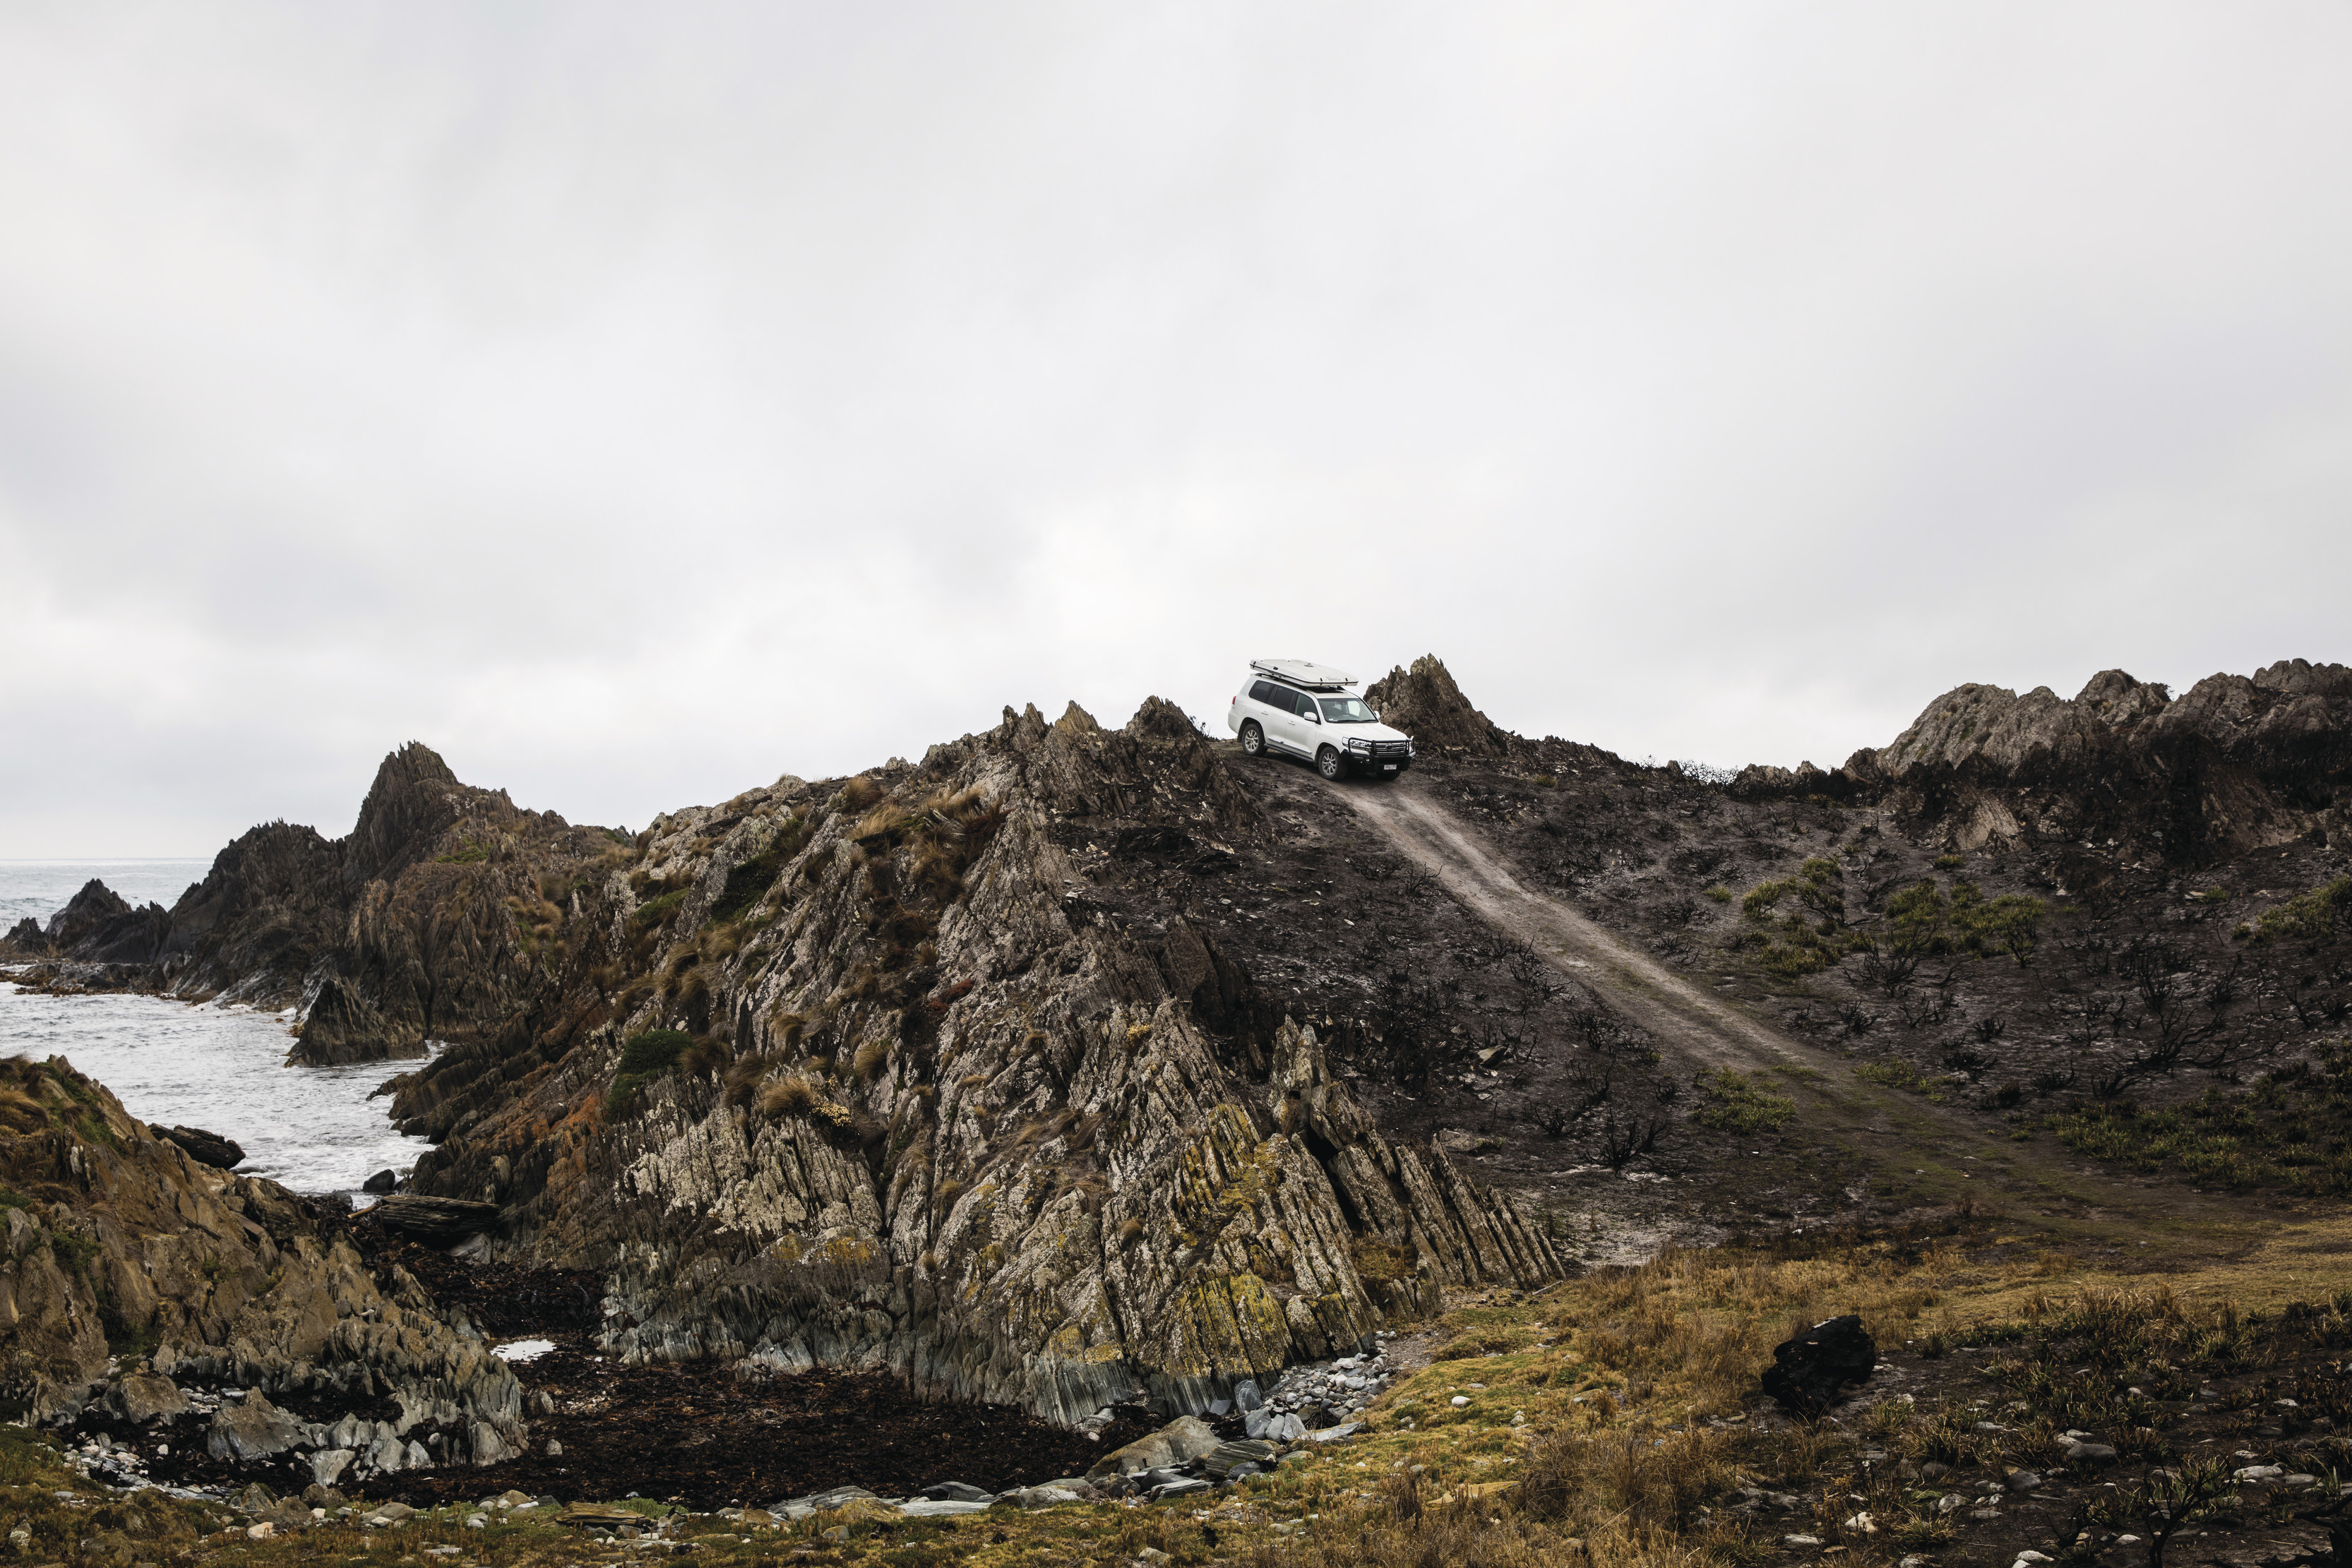 Car driving down a rocky road on Gardiner Point surrounded by rocks and grass on a cloudy day.